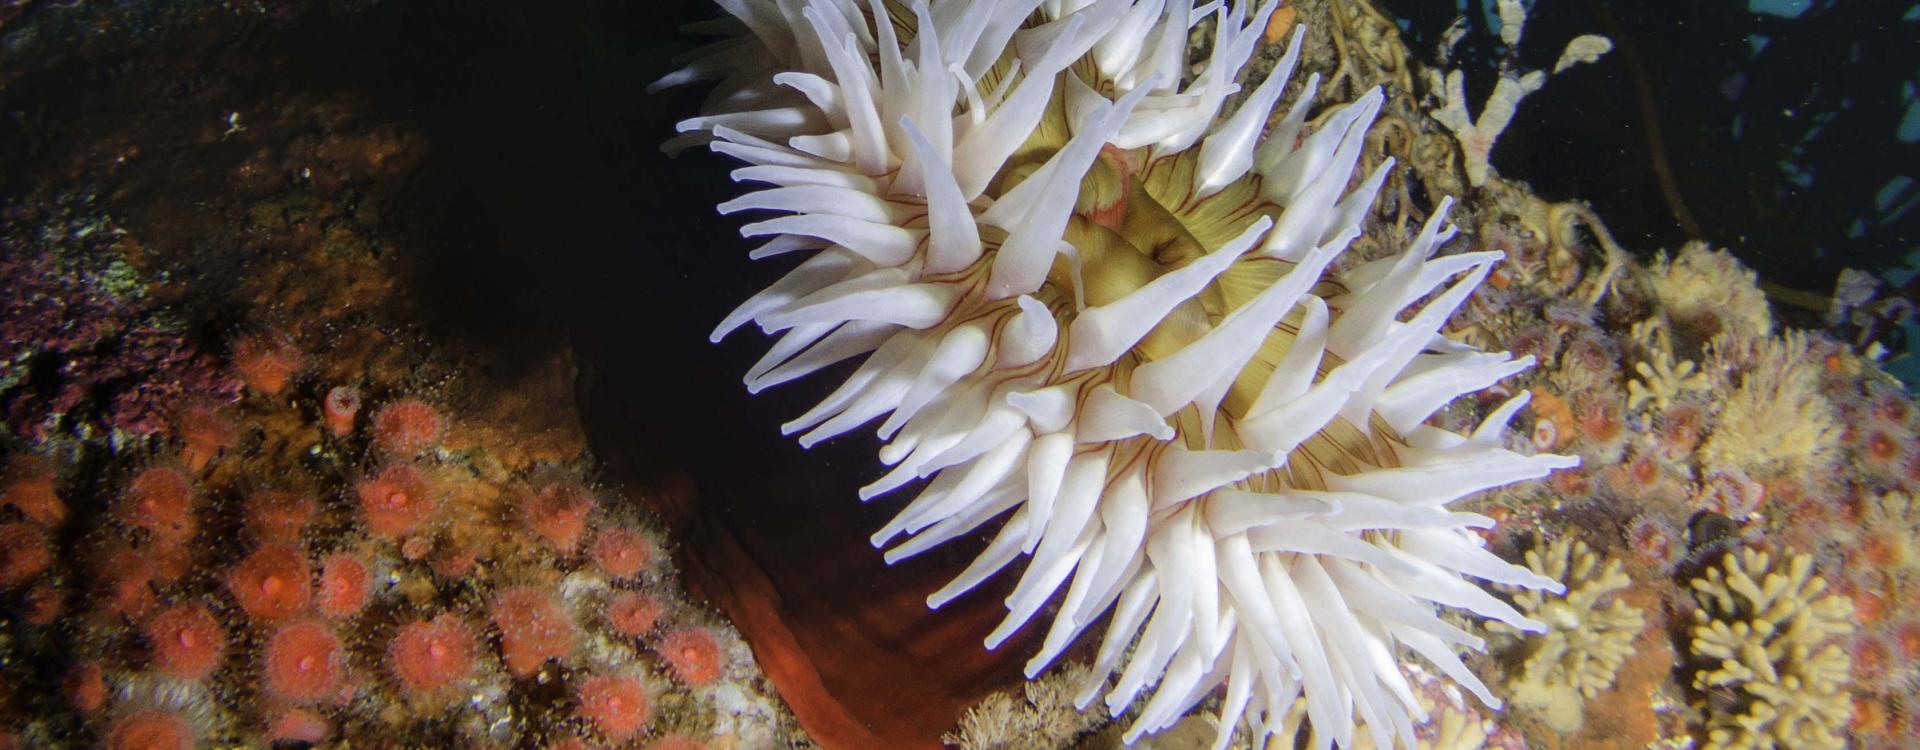 Large white anemone and  many strawberry anemones at the bottom of ocean floor